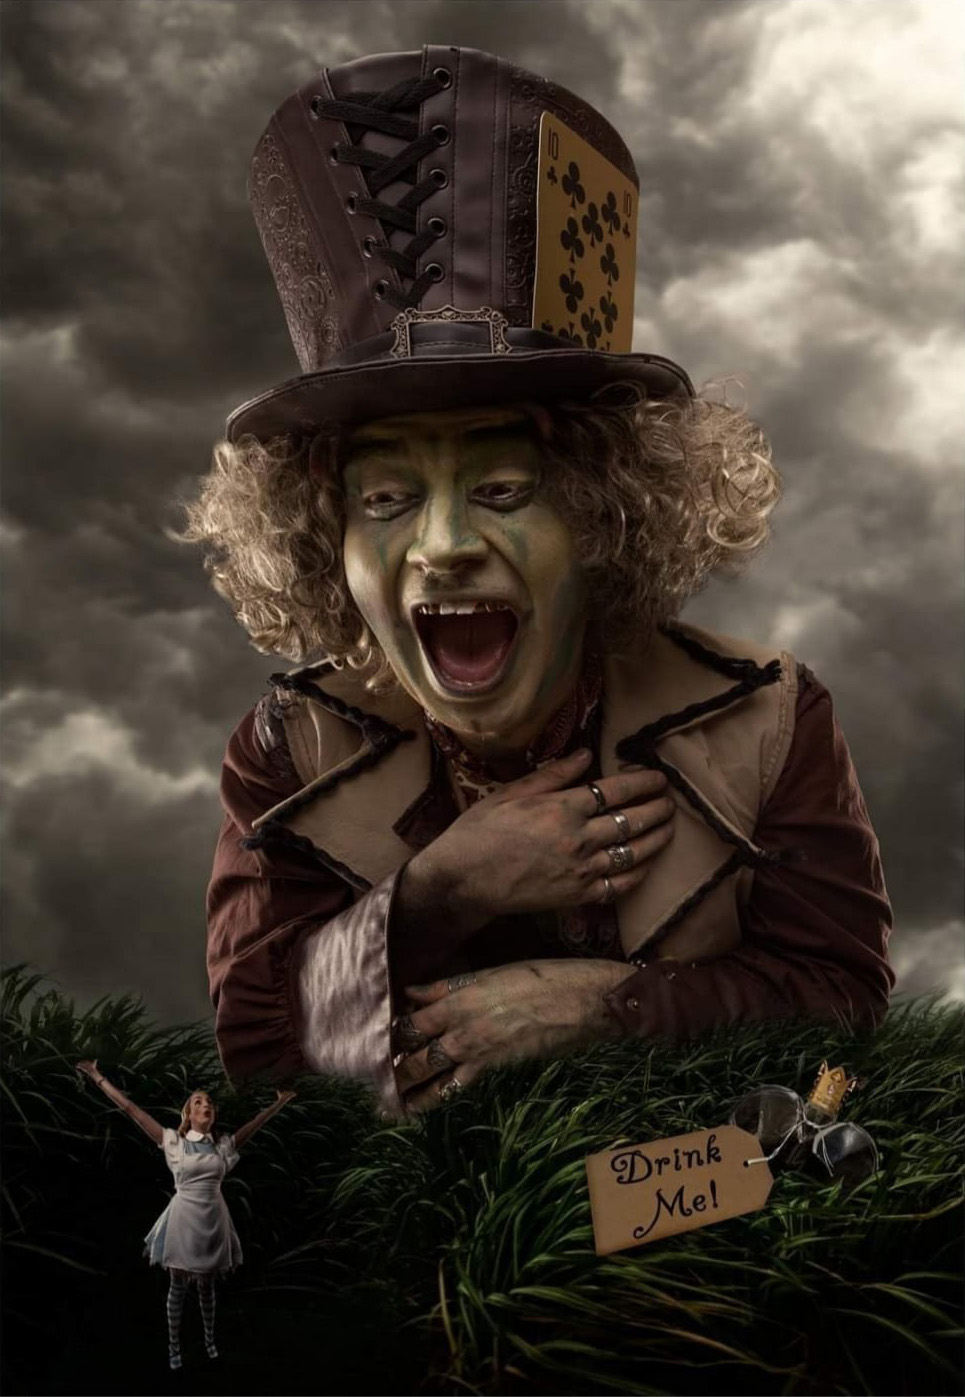 Stefan Pejic as The Mad Hatter from Alice in Wonderland